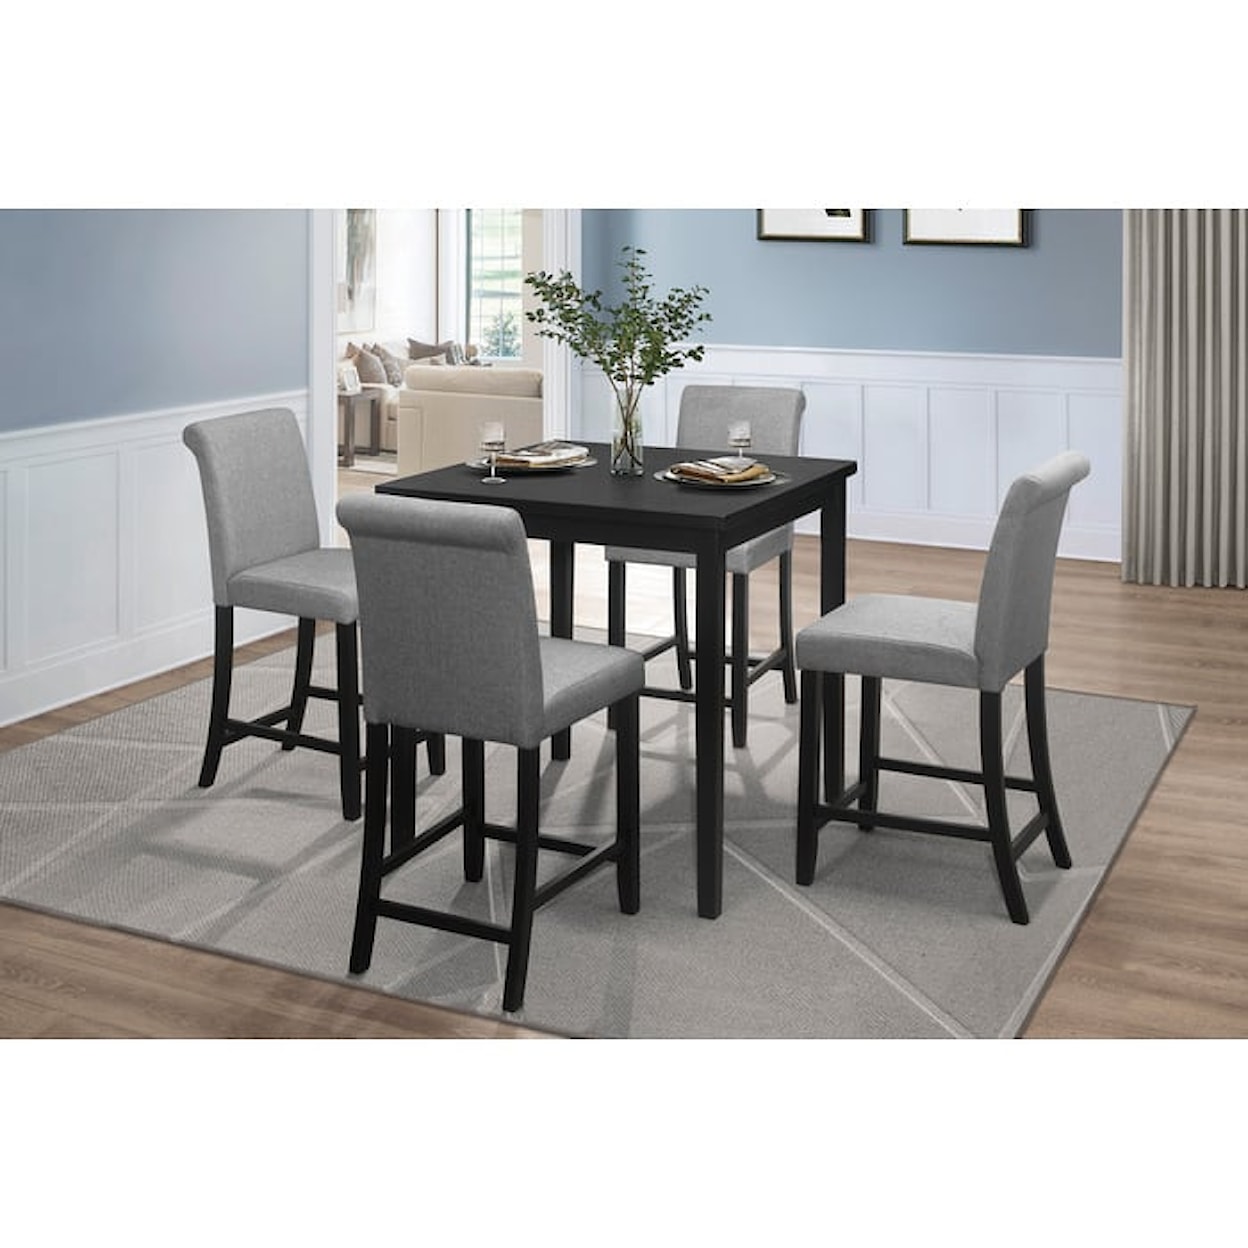 Homelegance Furniture Adina Counter Height Table